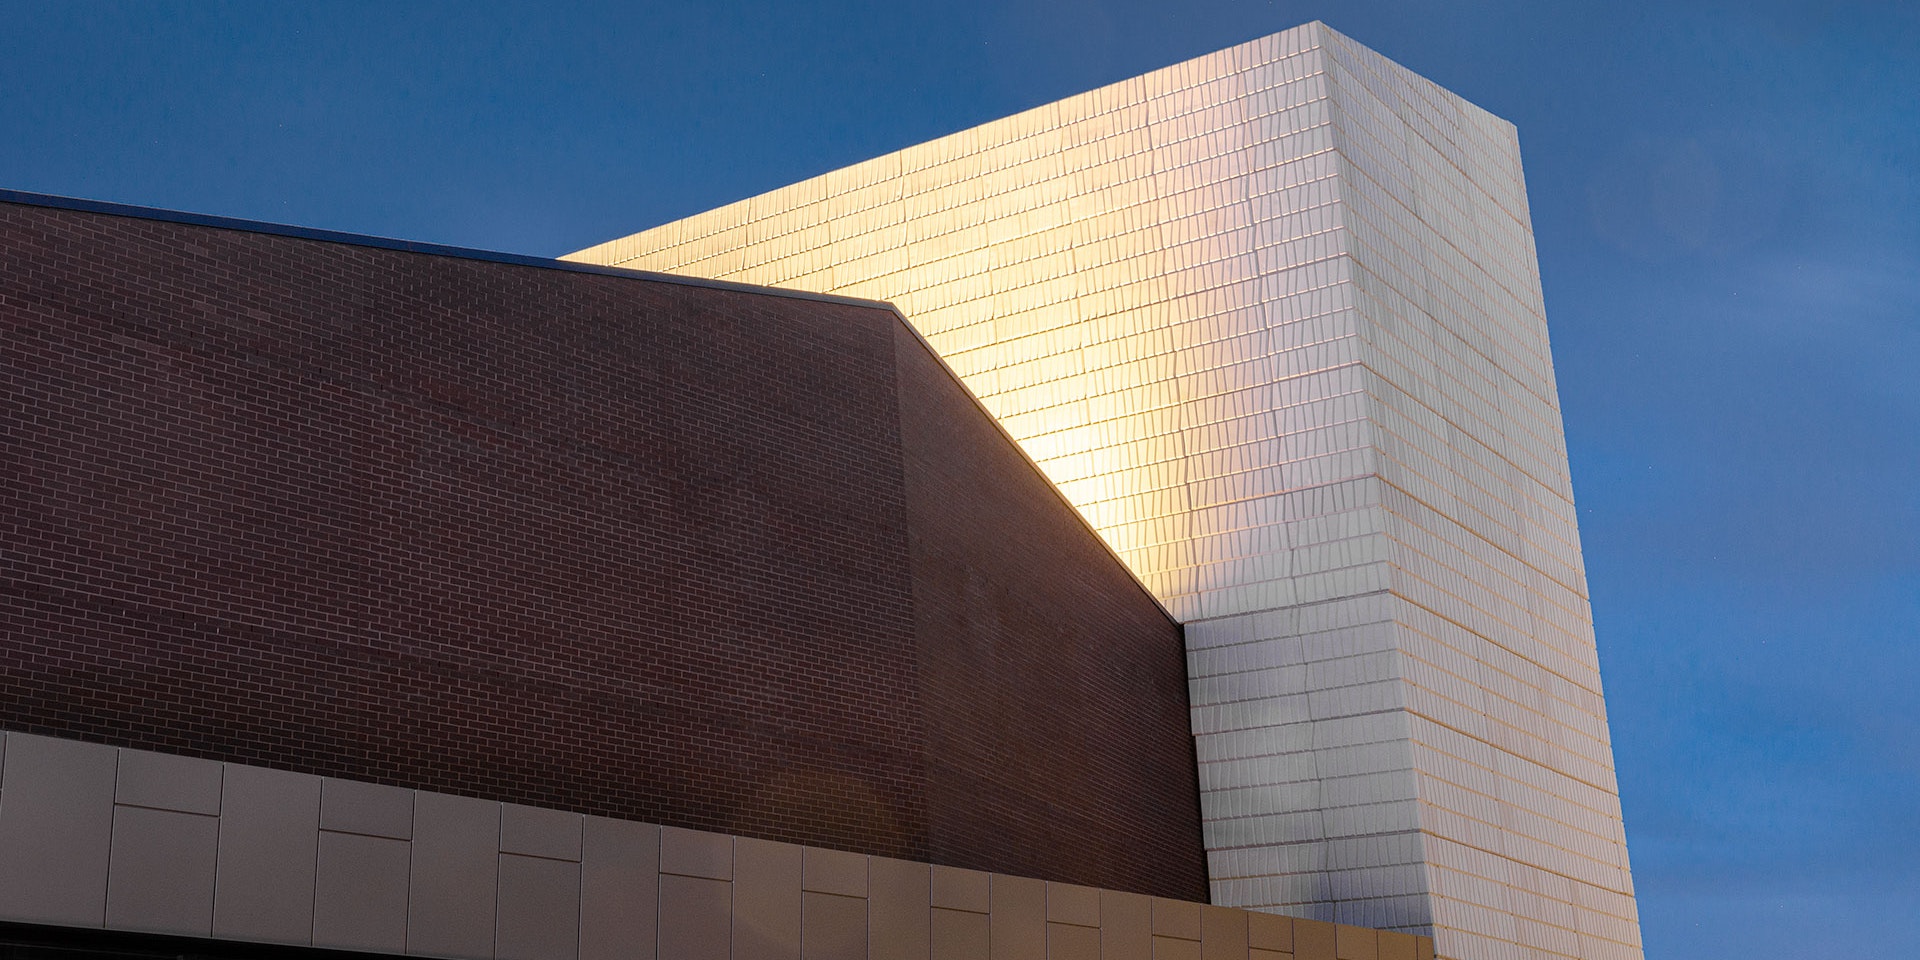 Maxis high-power linear floodlight in application, installed on the facade of the Alexander Theatre.The luminaires feature custom designed baffles that mitigate any unnecessary spill light.